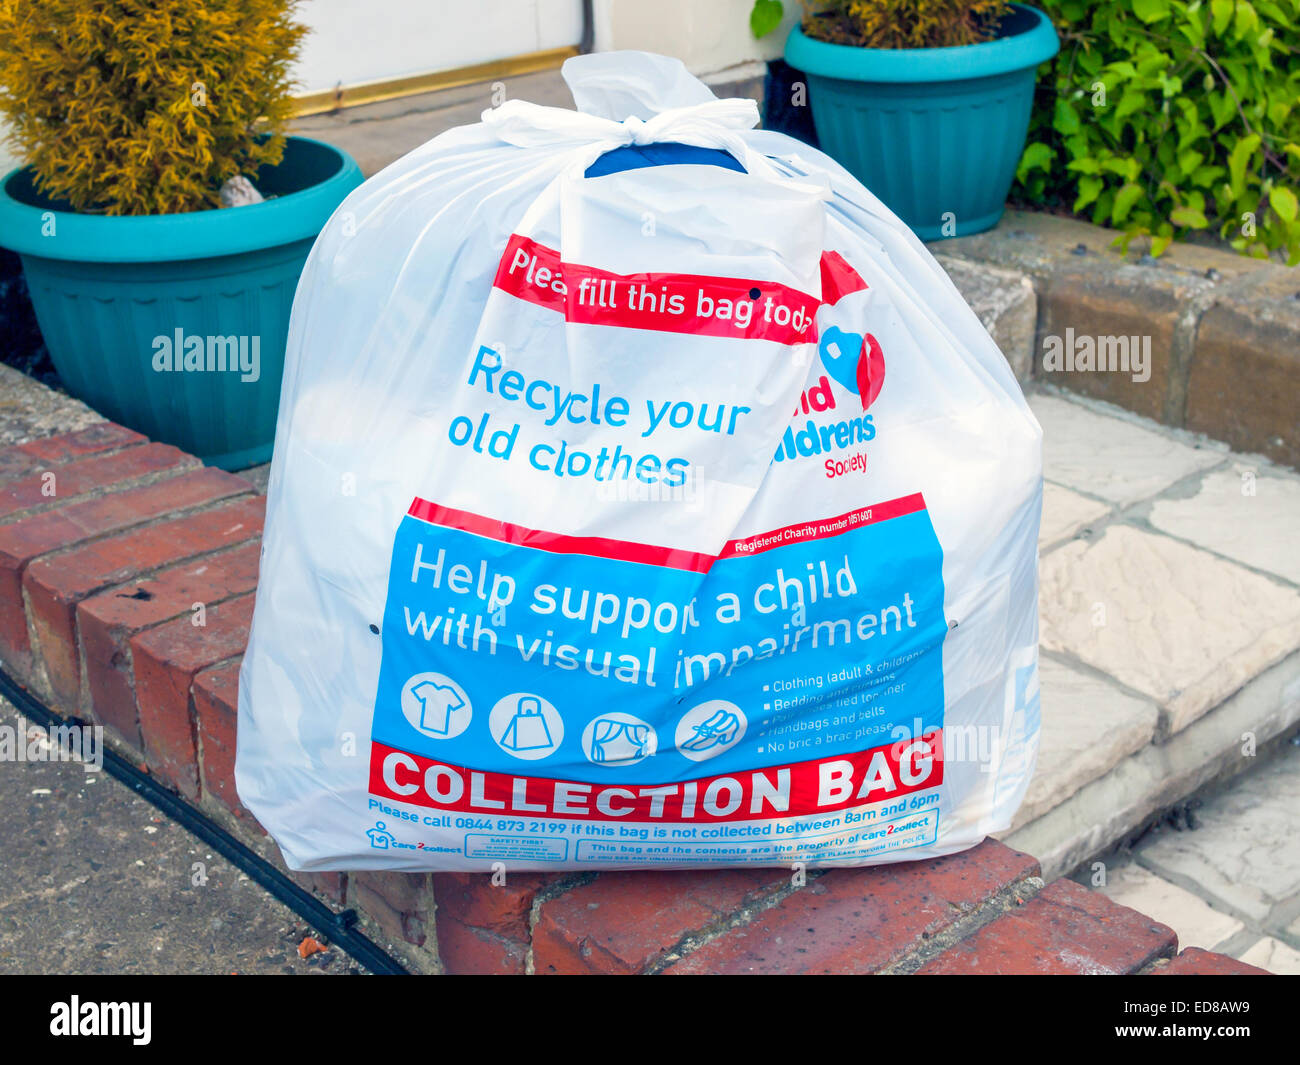 A Charity for visually impaired children bag filled with clothes placed outside a house ready for collection. Stock Photo